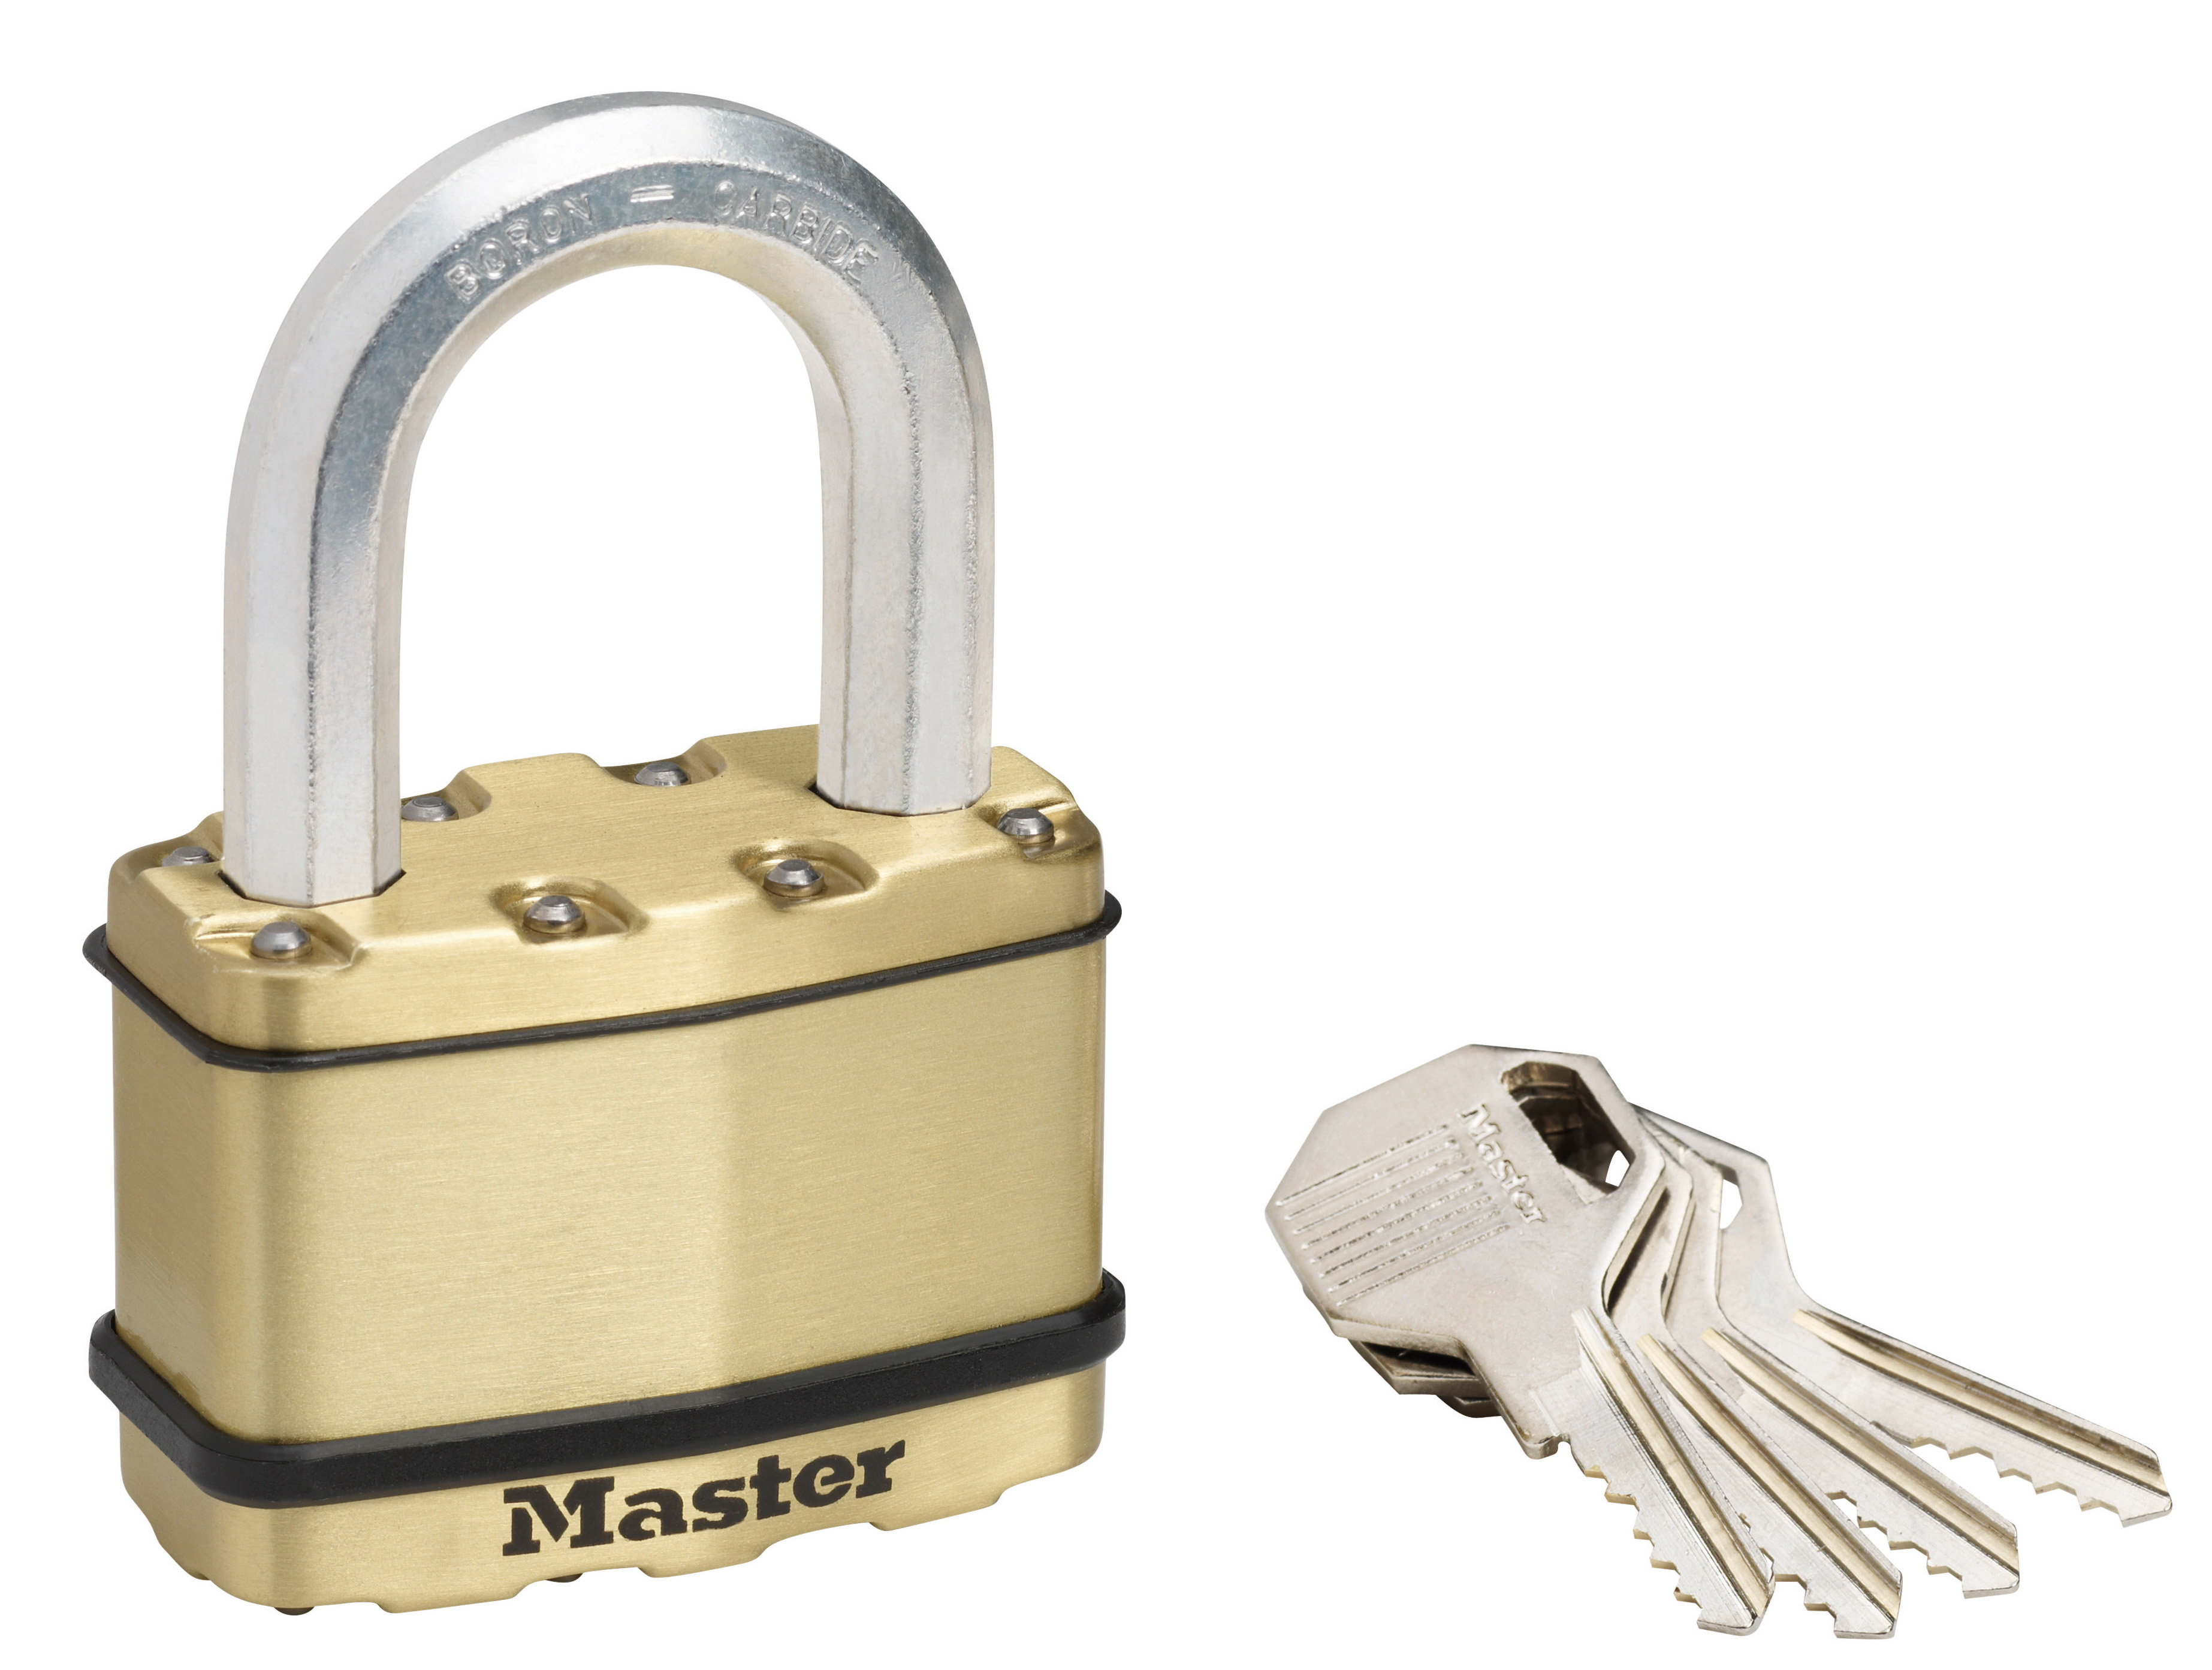 Armoured Padlock Laminated Steel Level 9 Master Lock Excell Security 4 Keys M5T 